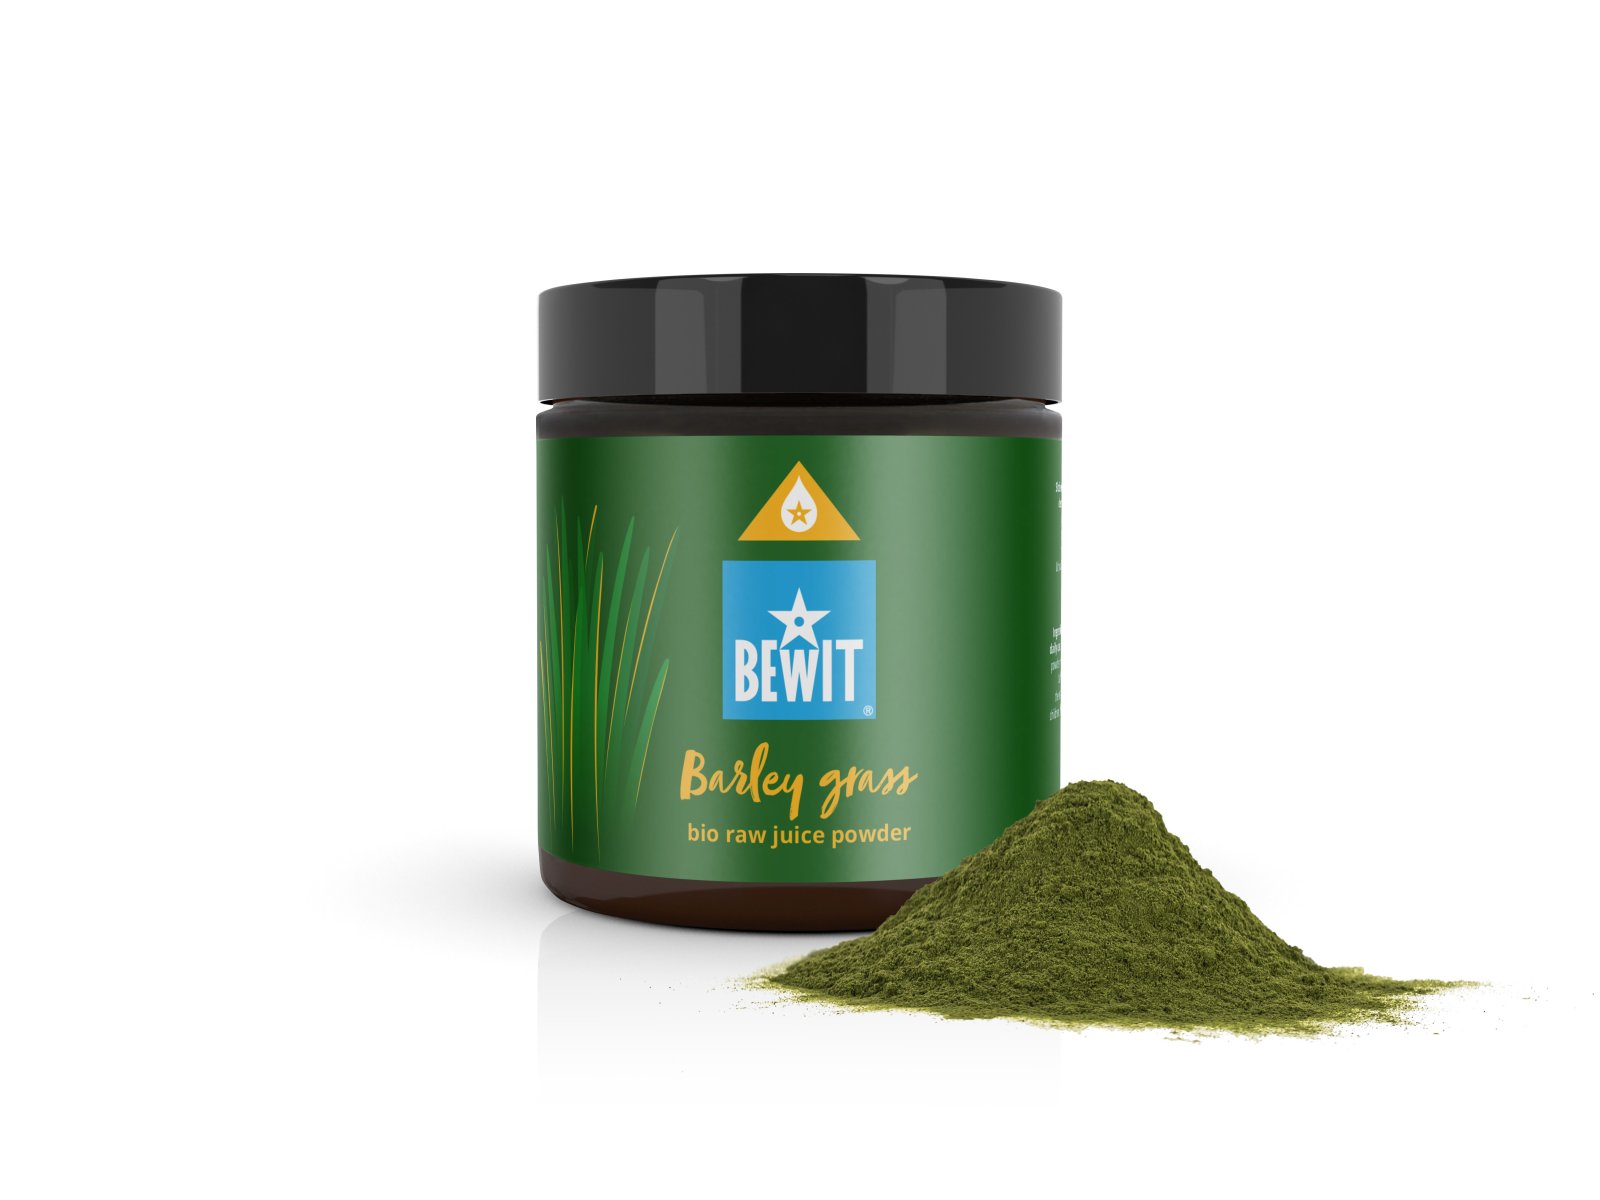 BEWIT Organic young barley RAW, juice powder - Powdered juice with maximum concentration of nutrients, food supplement